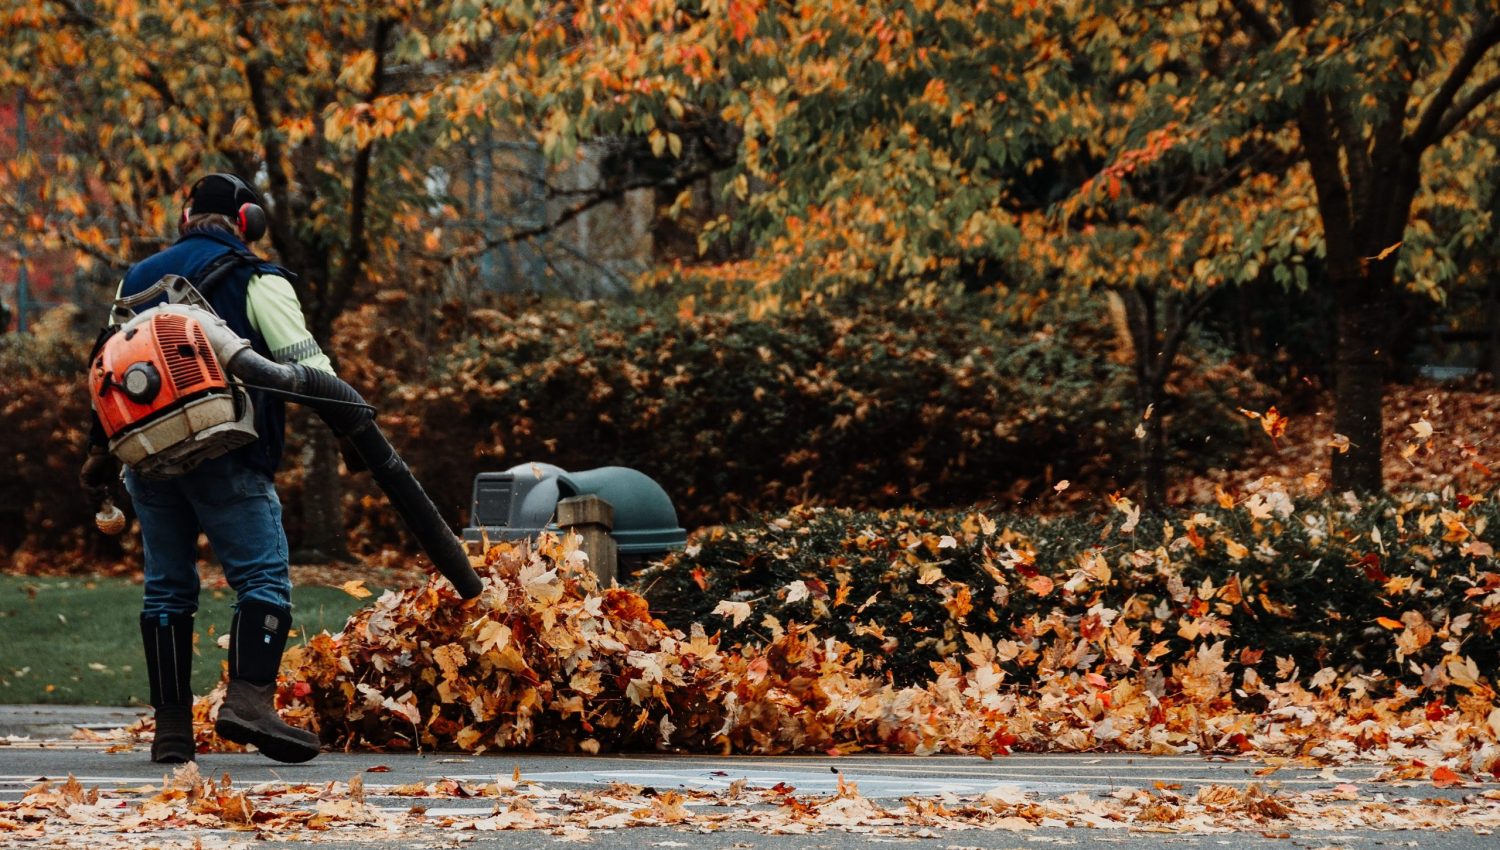 A man operating leaf blower to clean up the dried autumn leaves